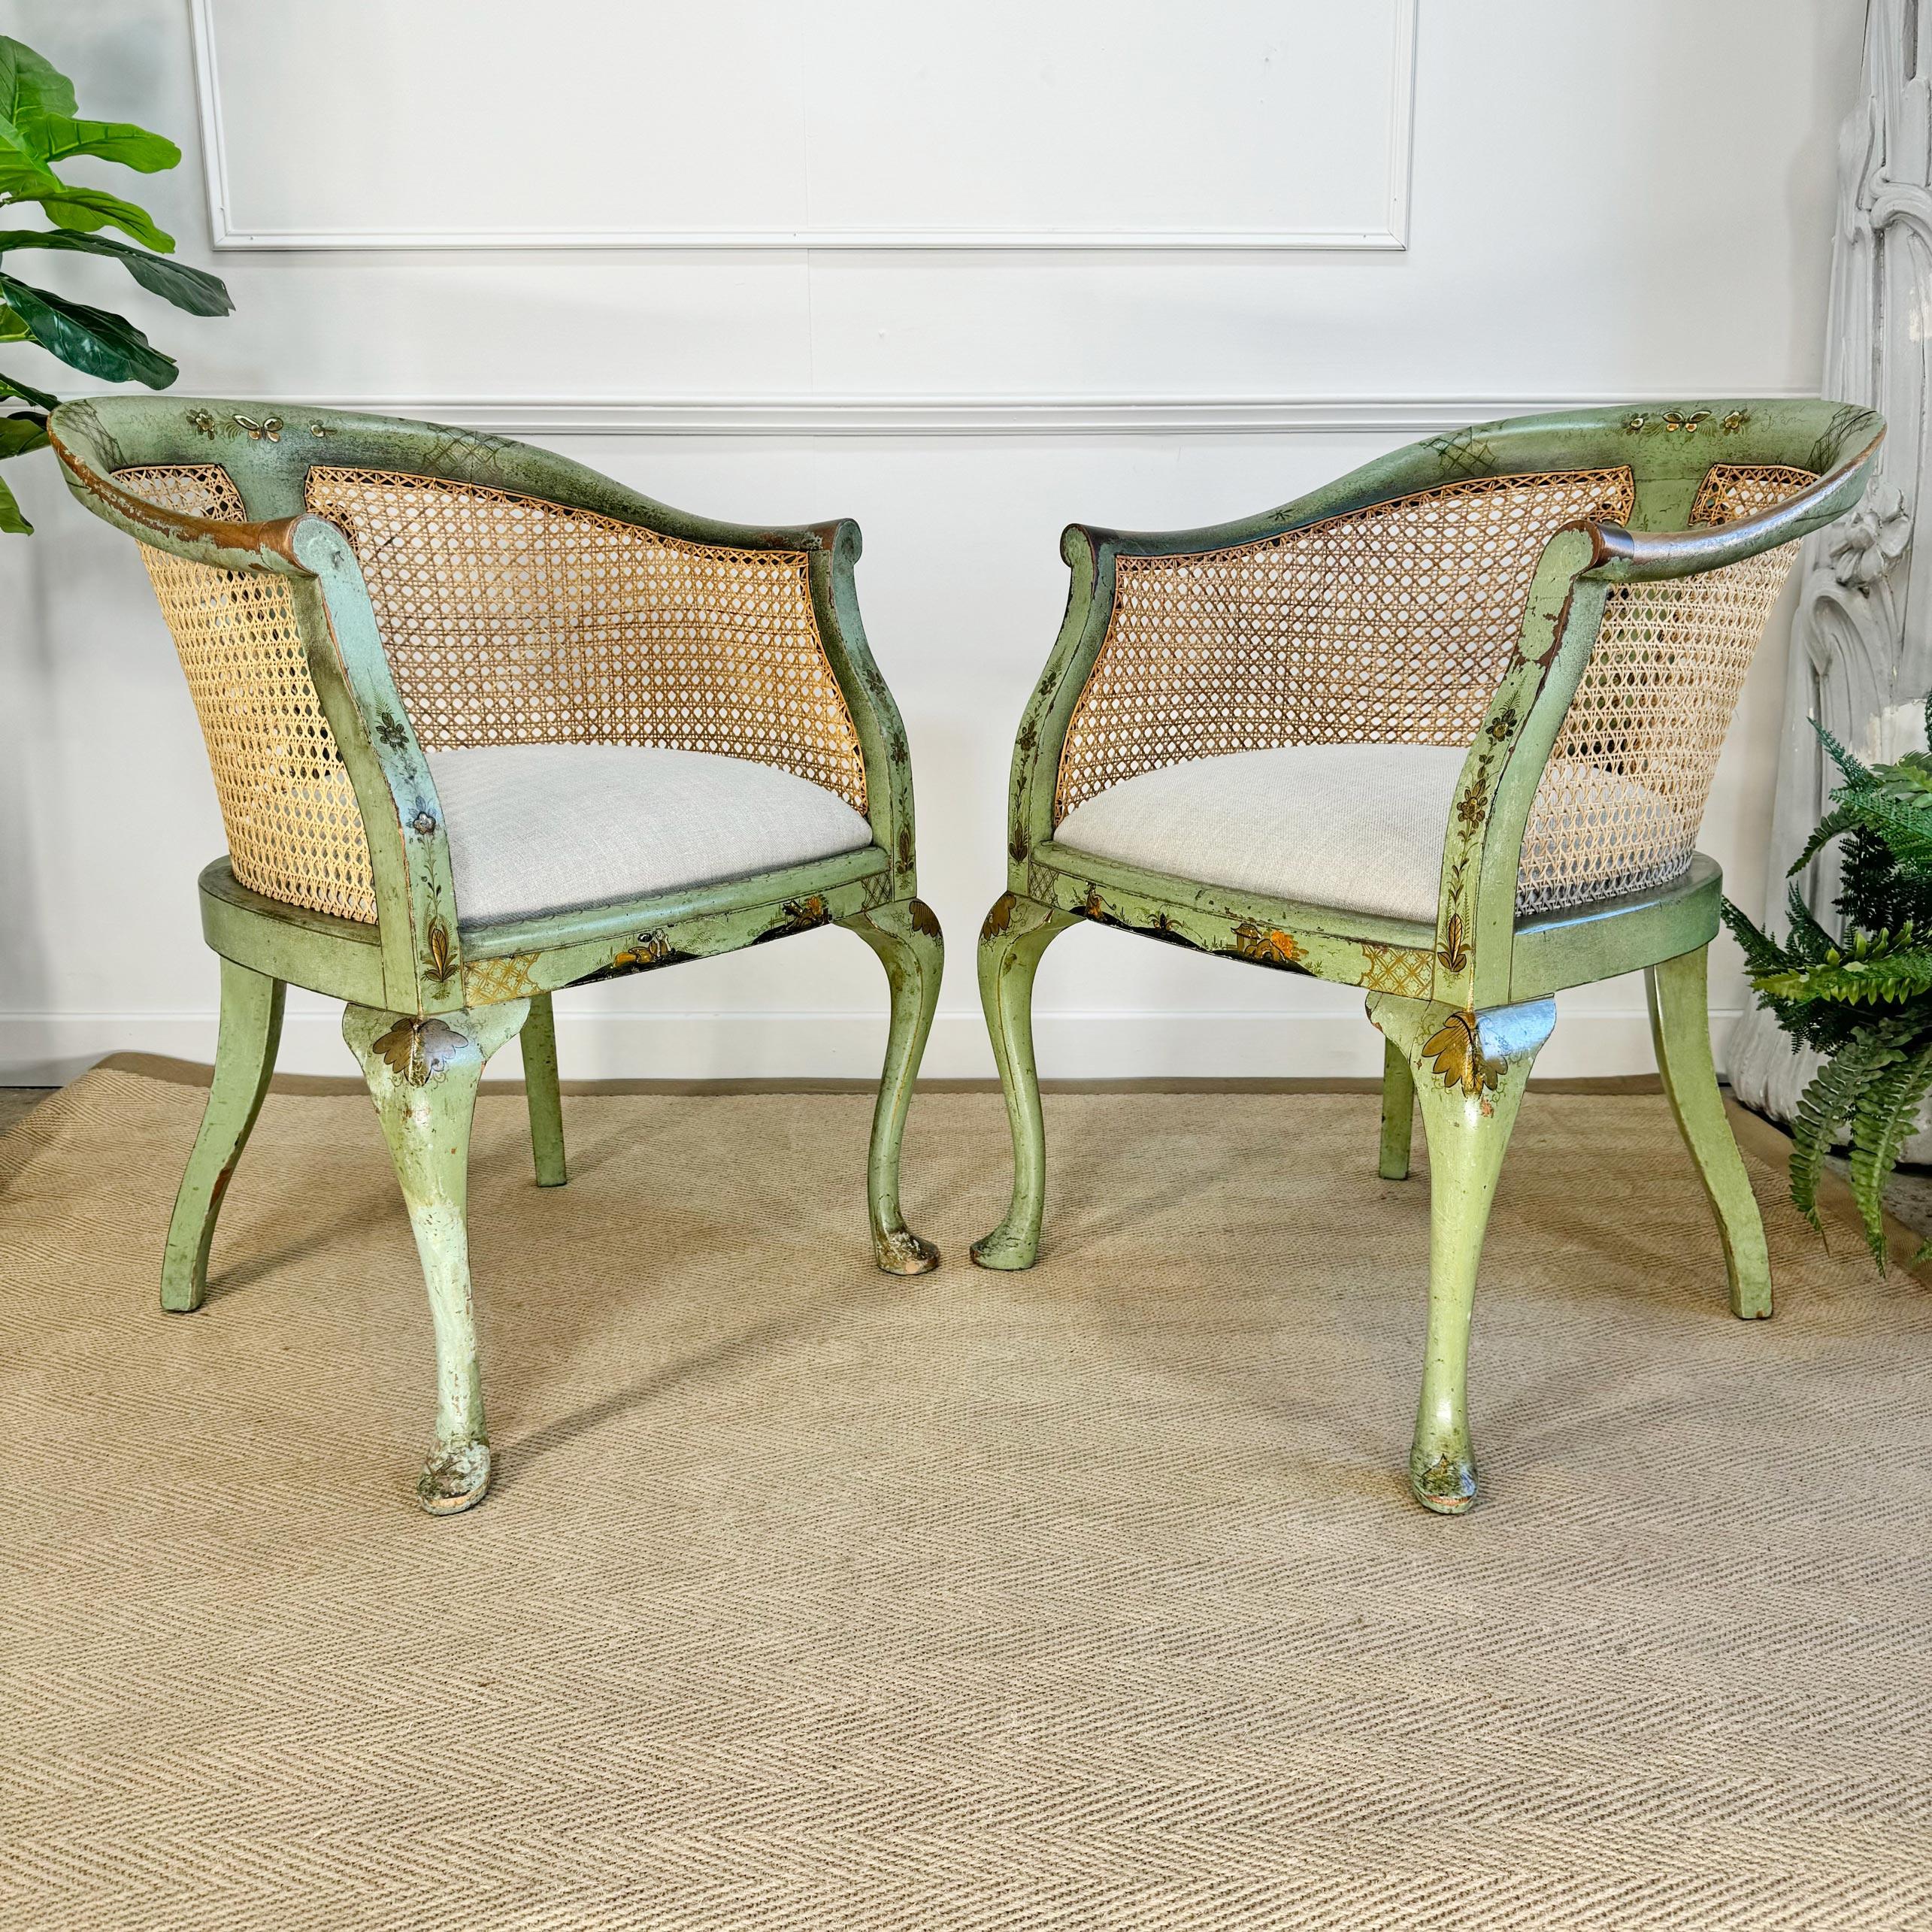 Pair of 19th Century Green Queen Anne Revival Chinoiserie Bergere Chairs For Sale 8